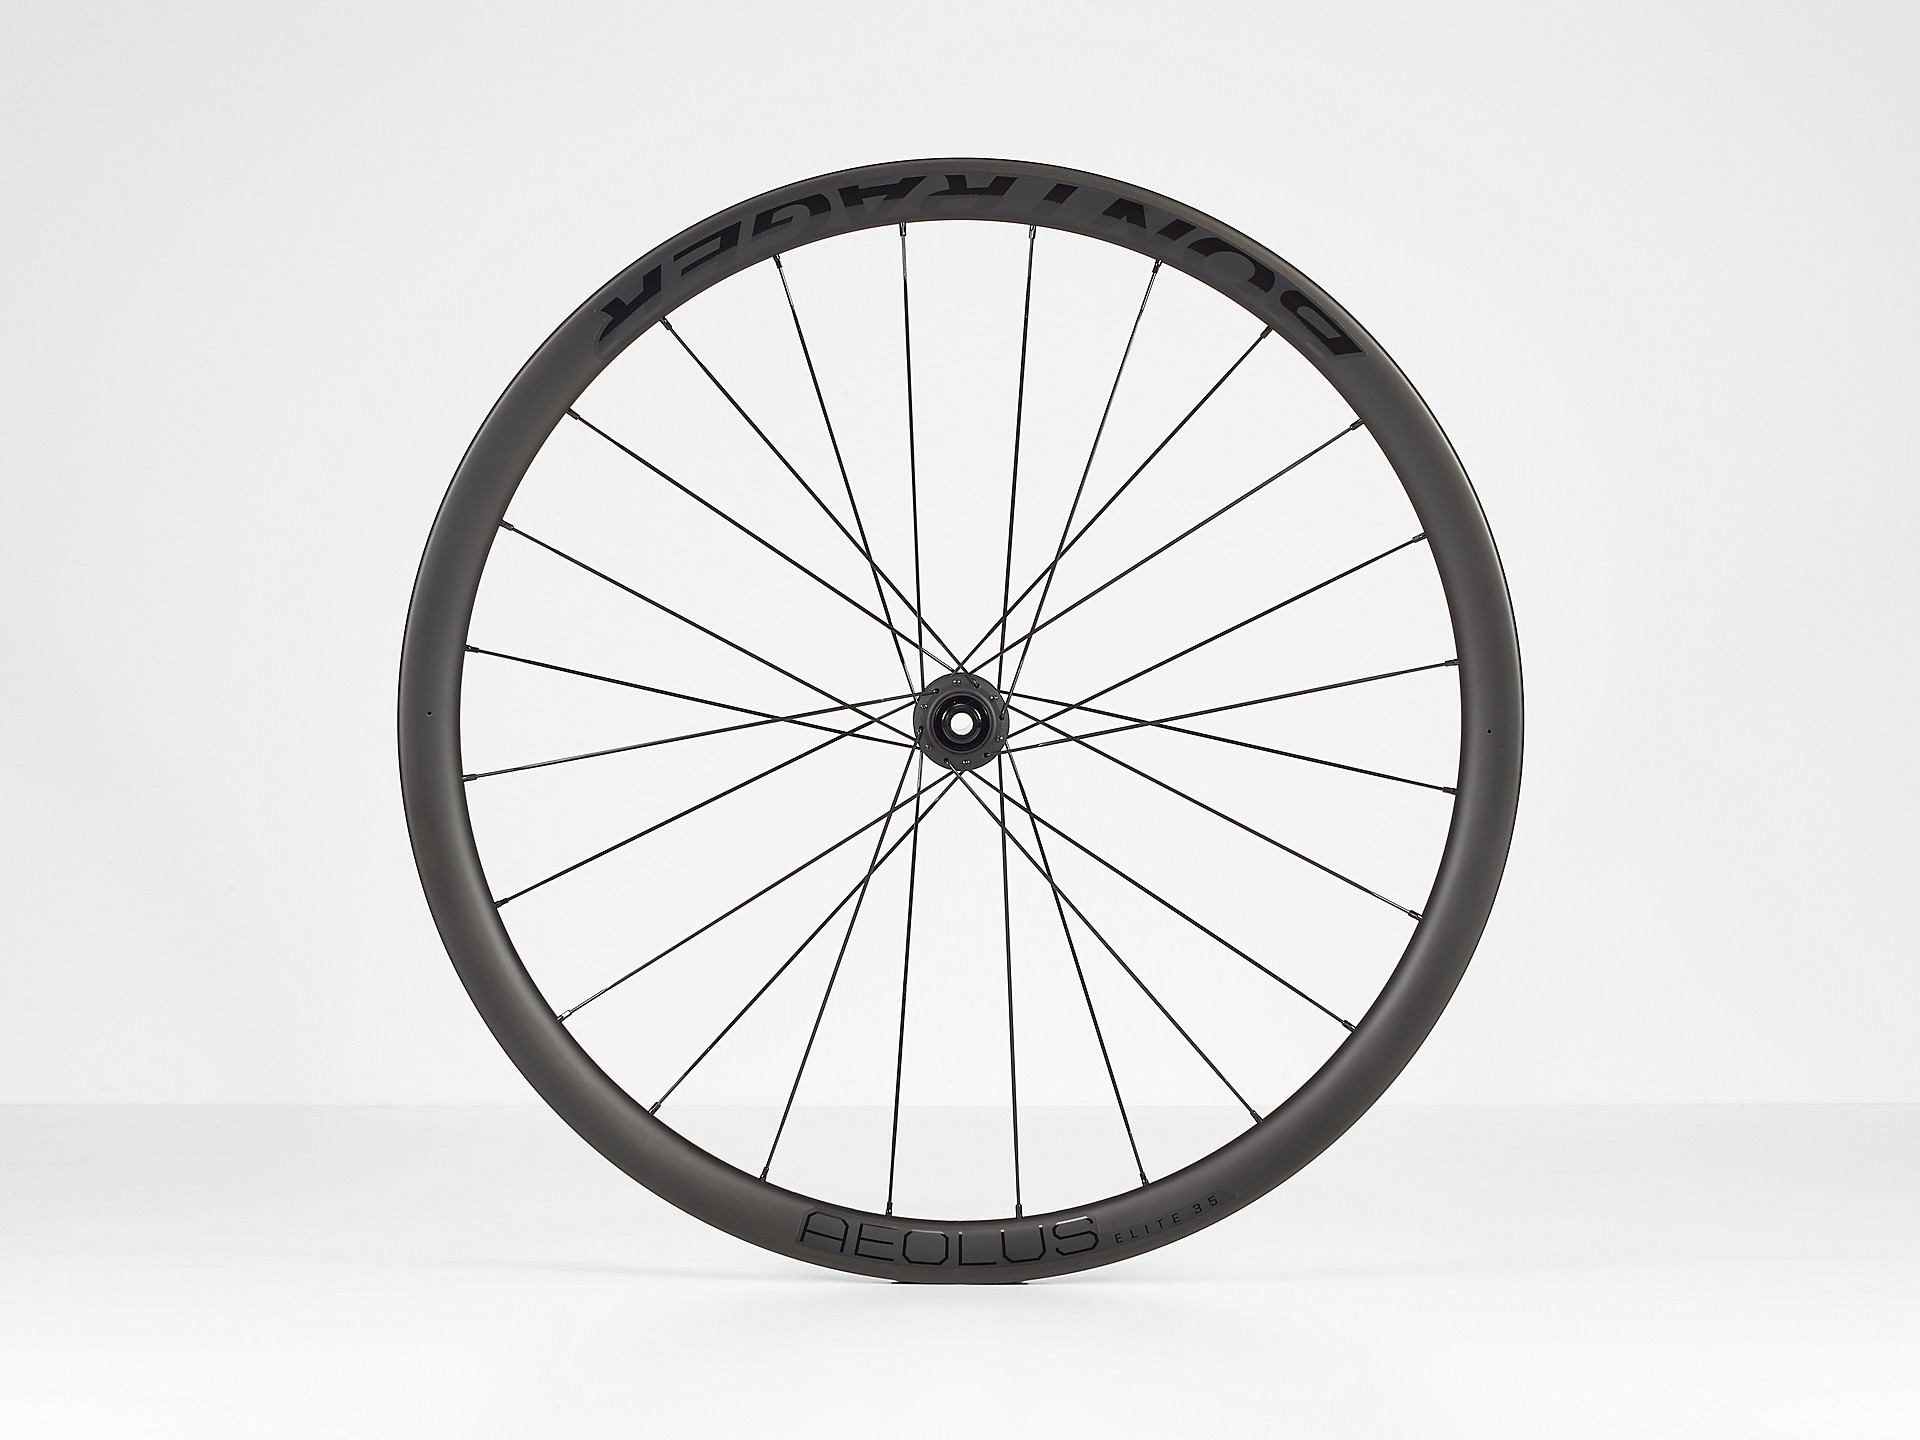 <a href="https://cycles-clement.be/product/roue-av-bont-aeolus-elite-35-disc-tlr-700/">ROUE AV BONT AEOLUS ELITE 35 DISC TLR 700</a>